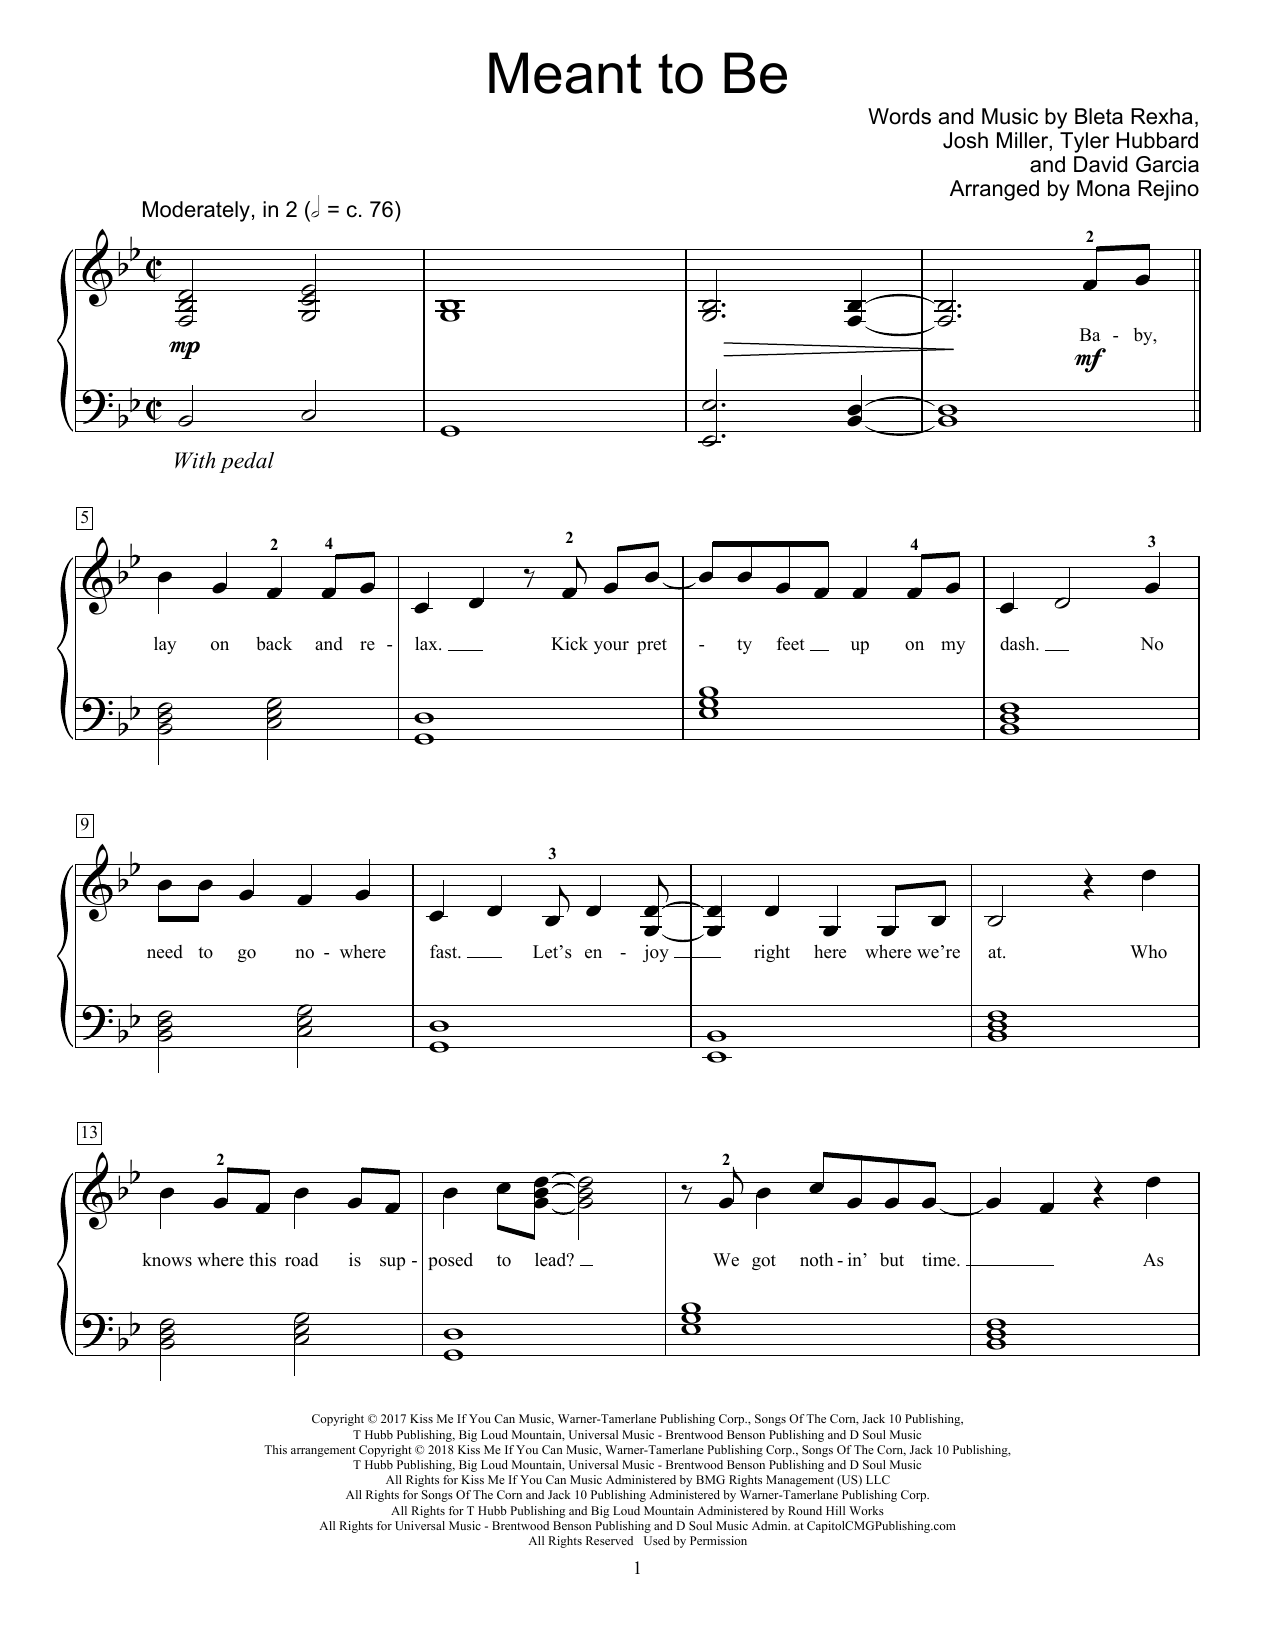 Download Bebe Rexha Meant To Be (feat. Florida Georgia Line Sheet Music